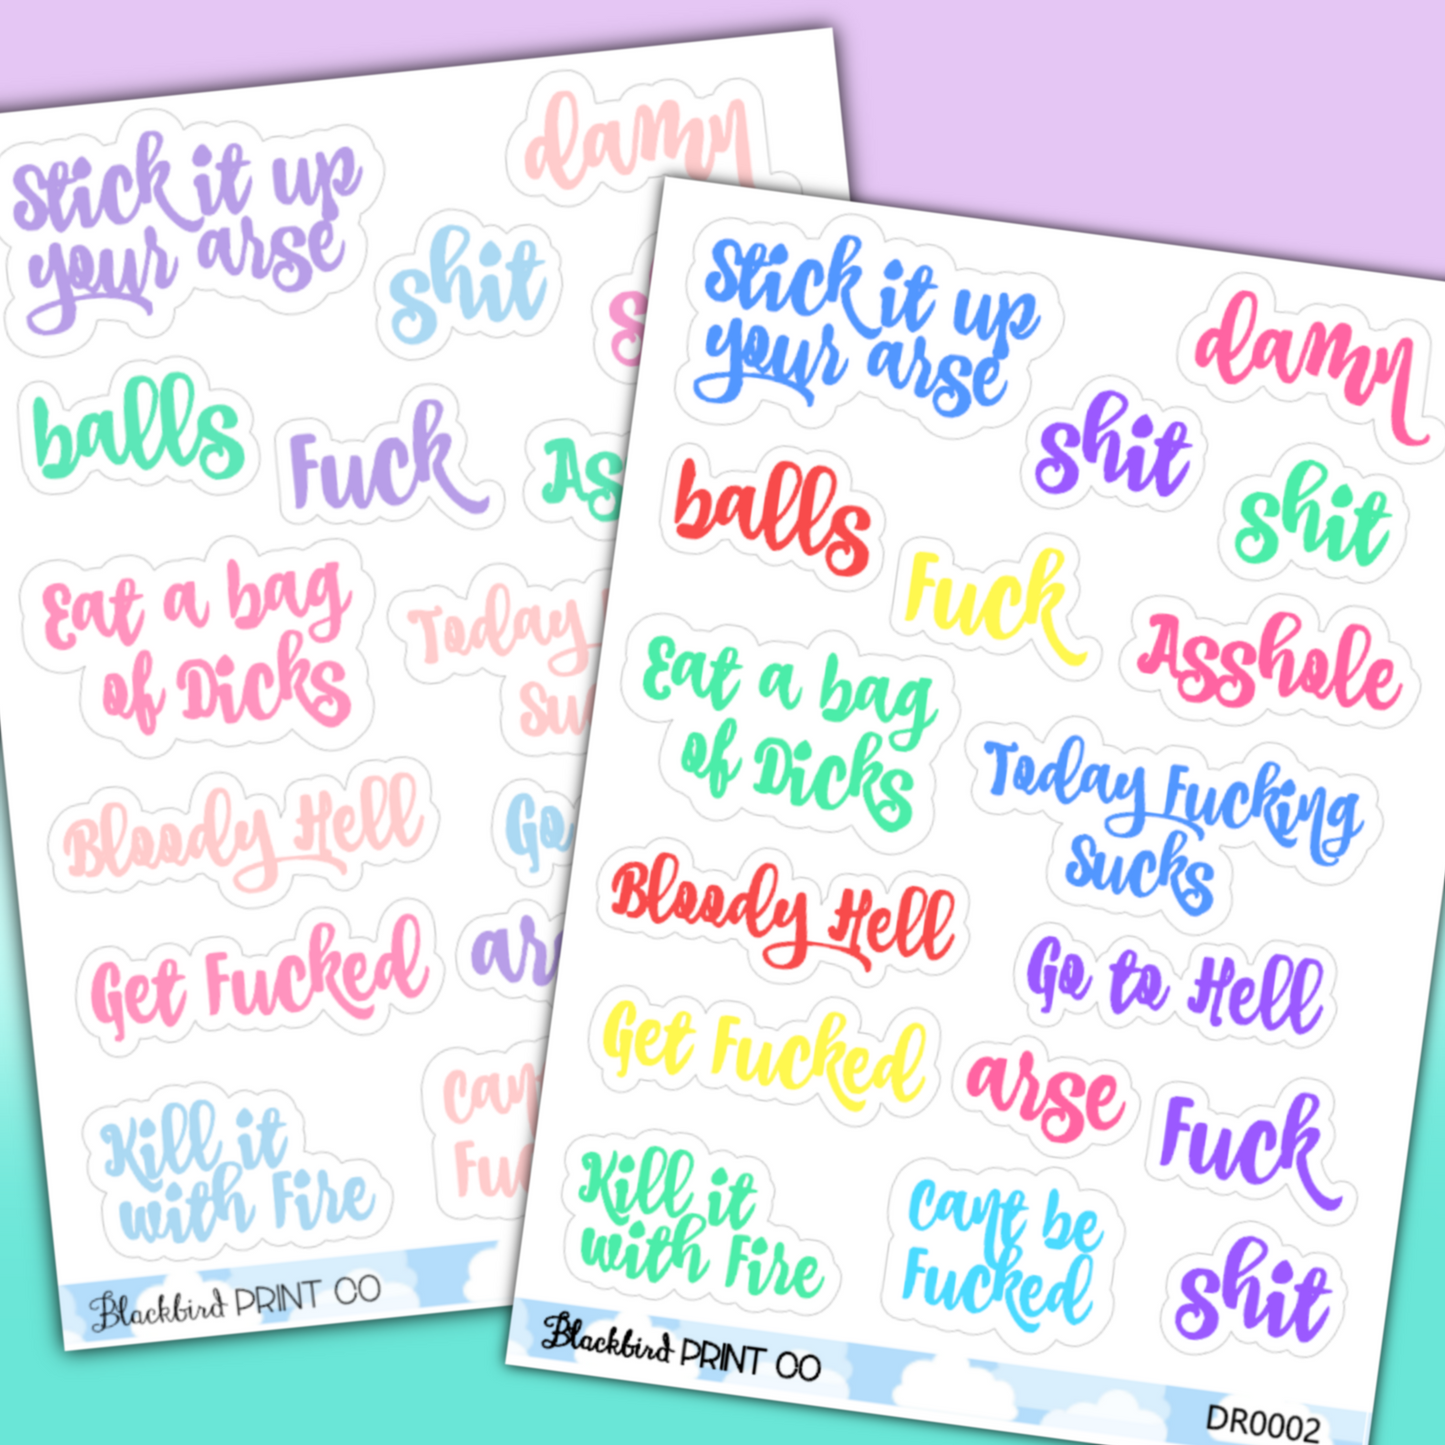 Sh*tty Day Planner Stickers (Curse Words - don't click if you're offended easily!)